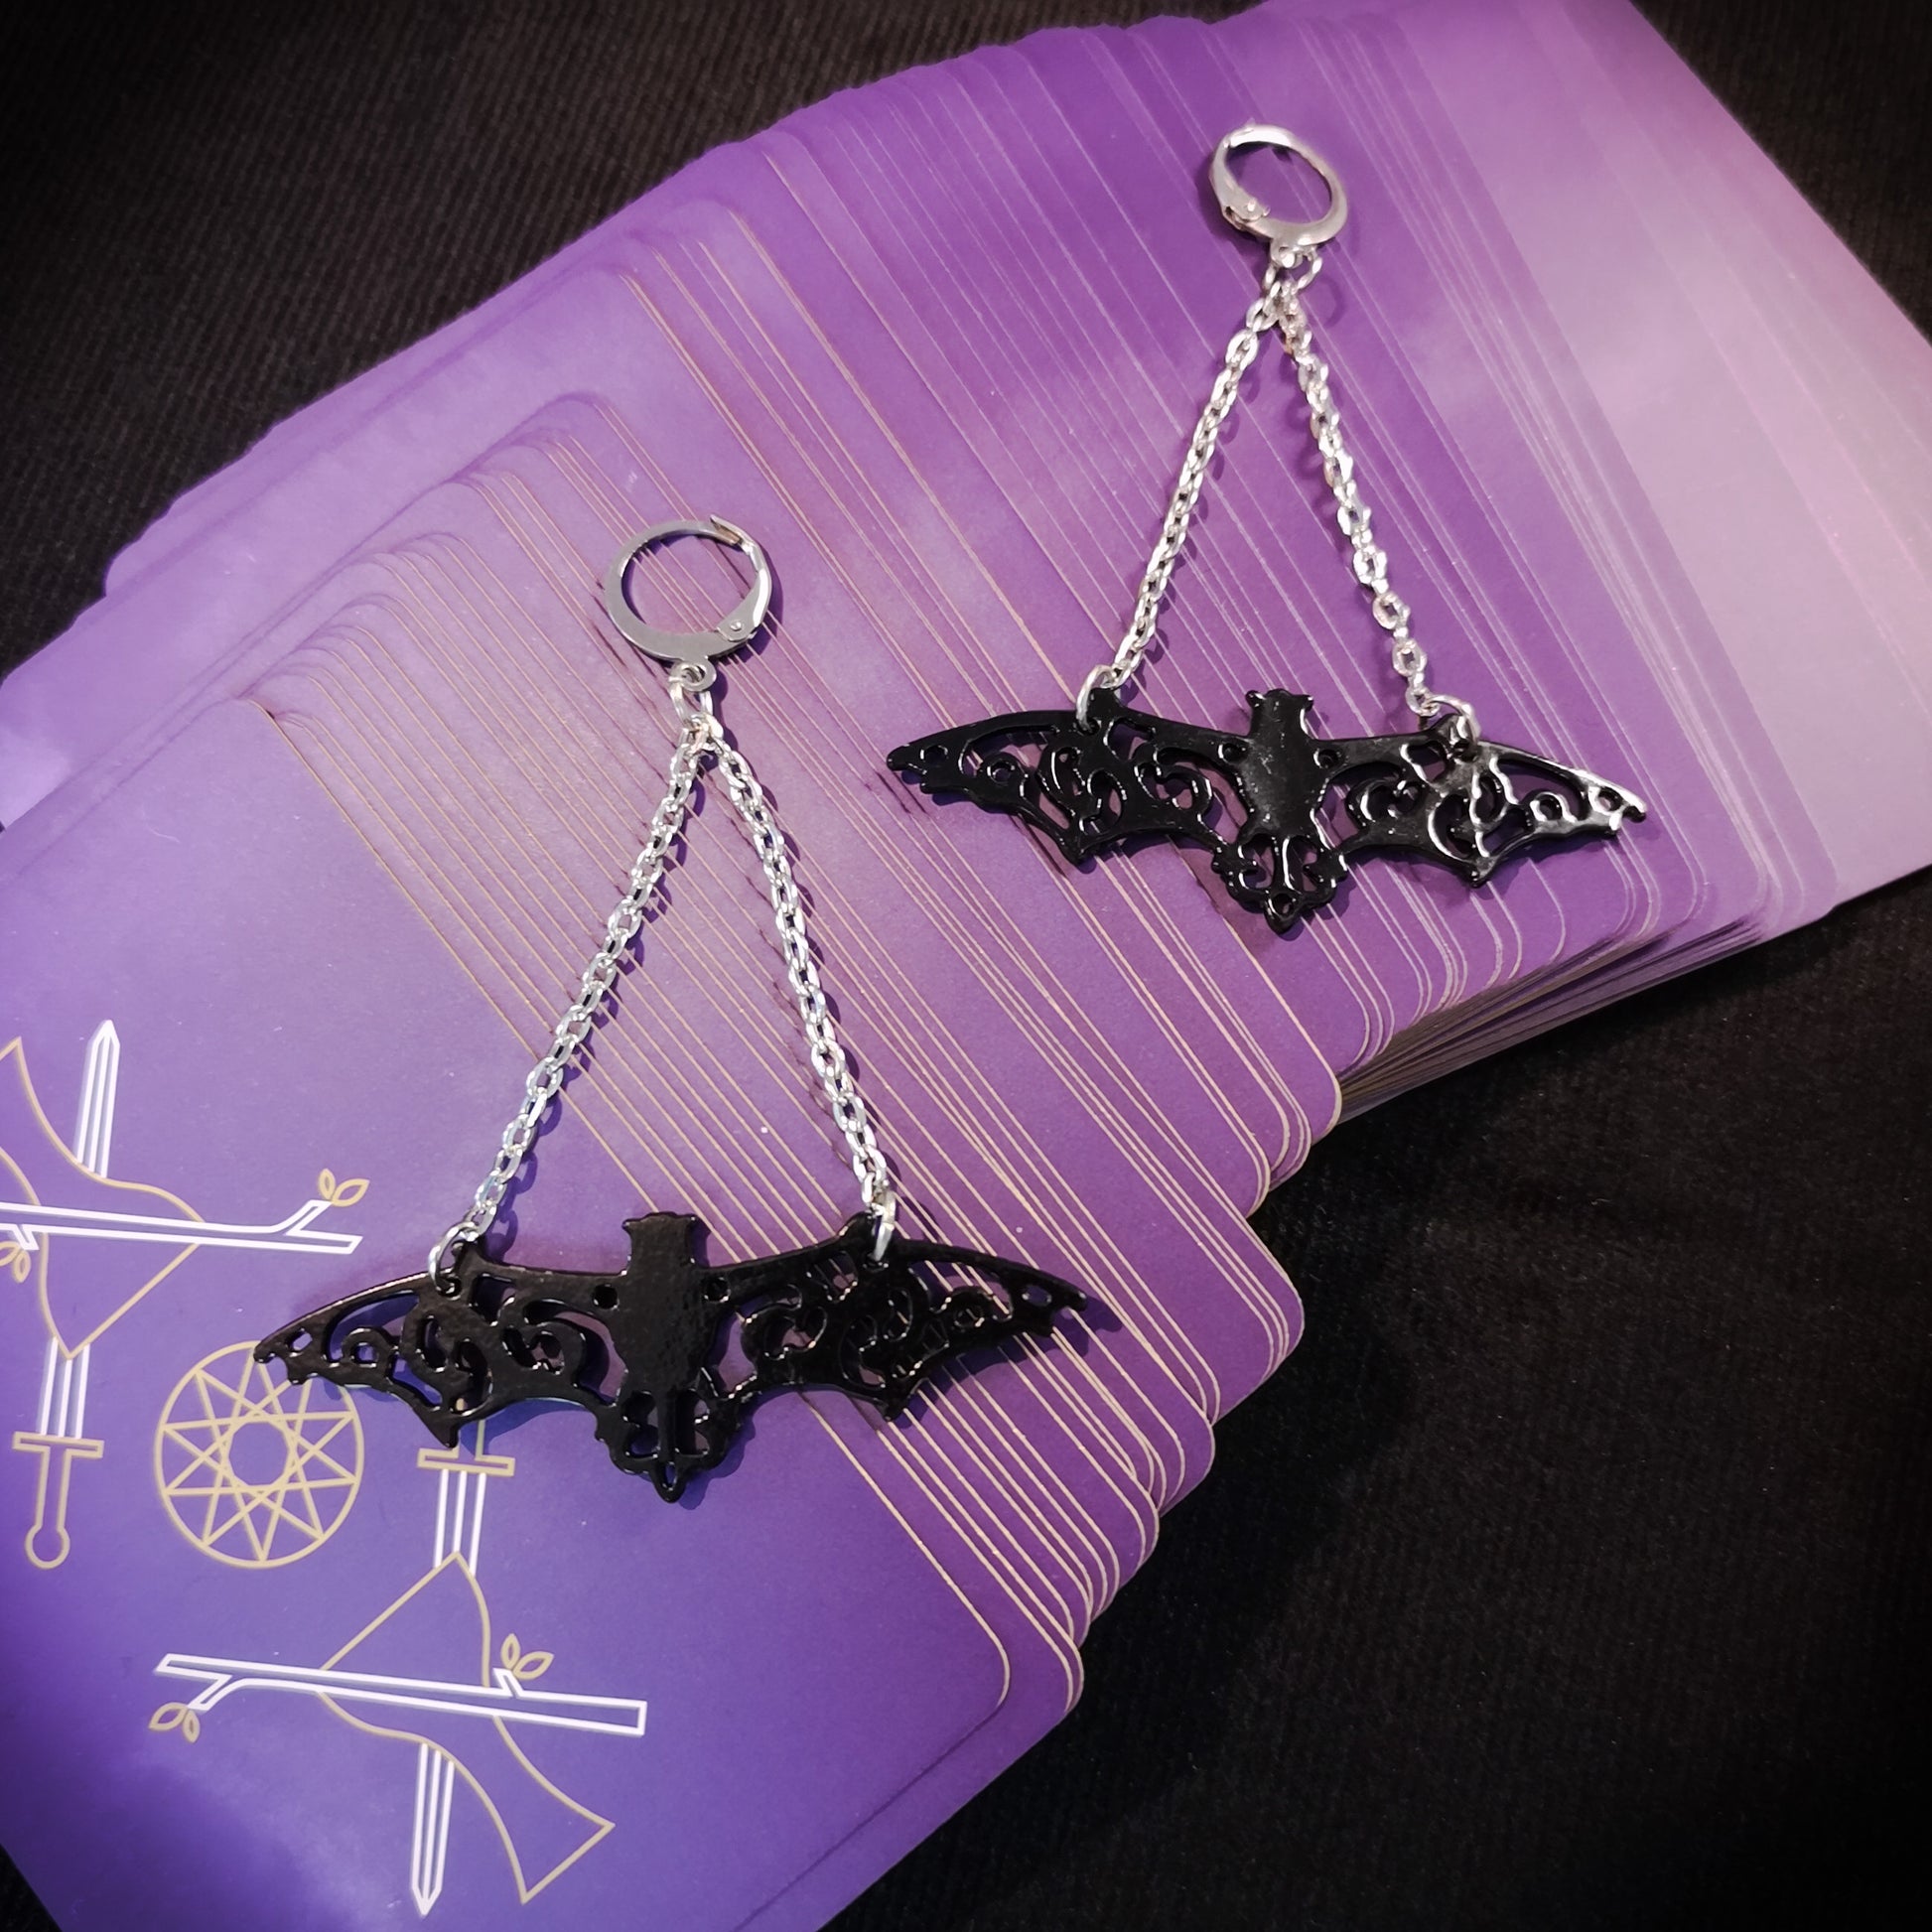 Black bats Halloween earrings - The French Witch shop